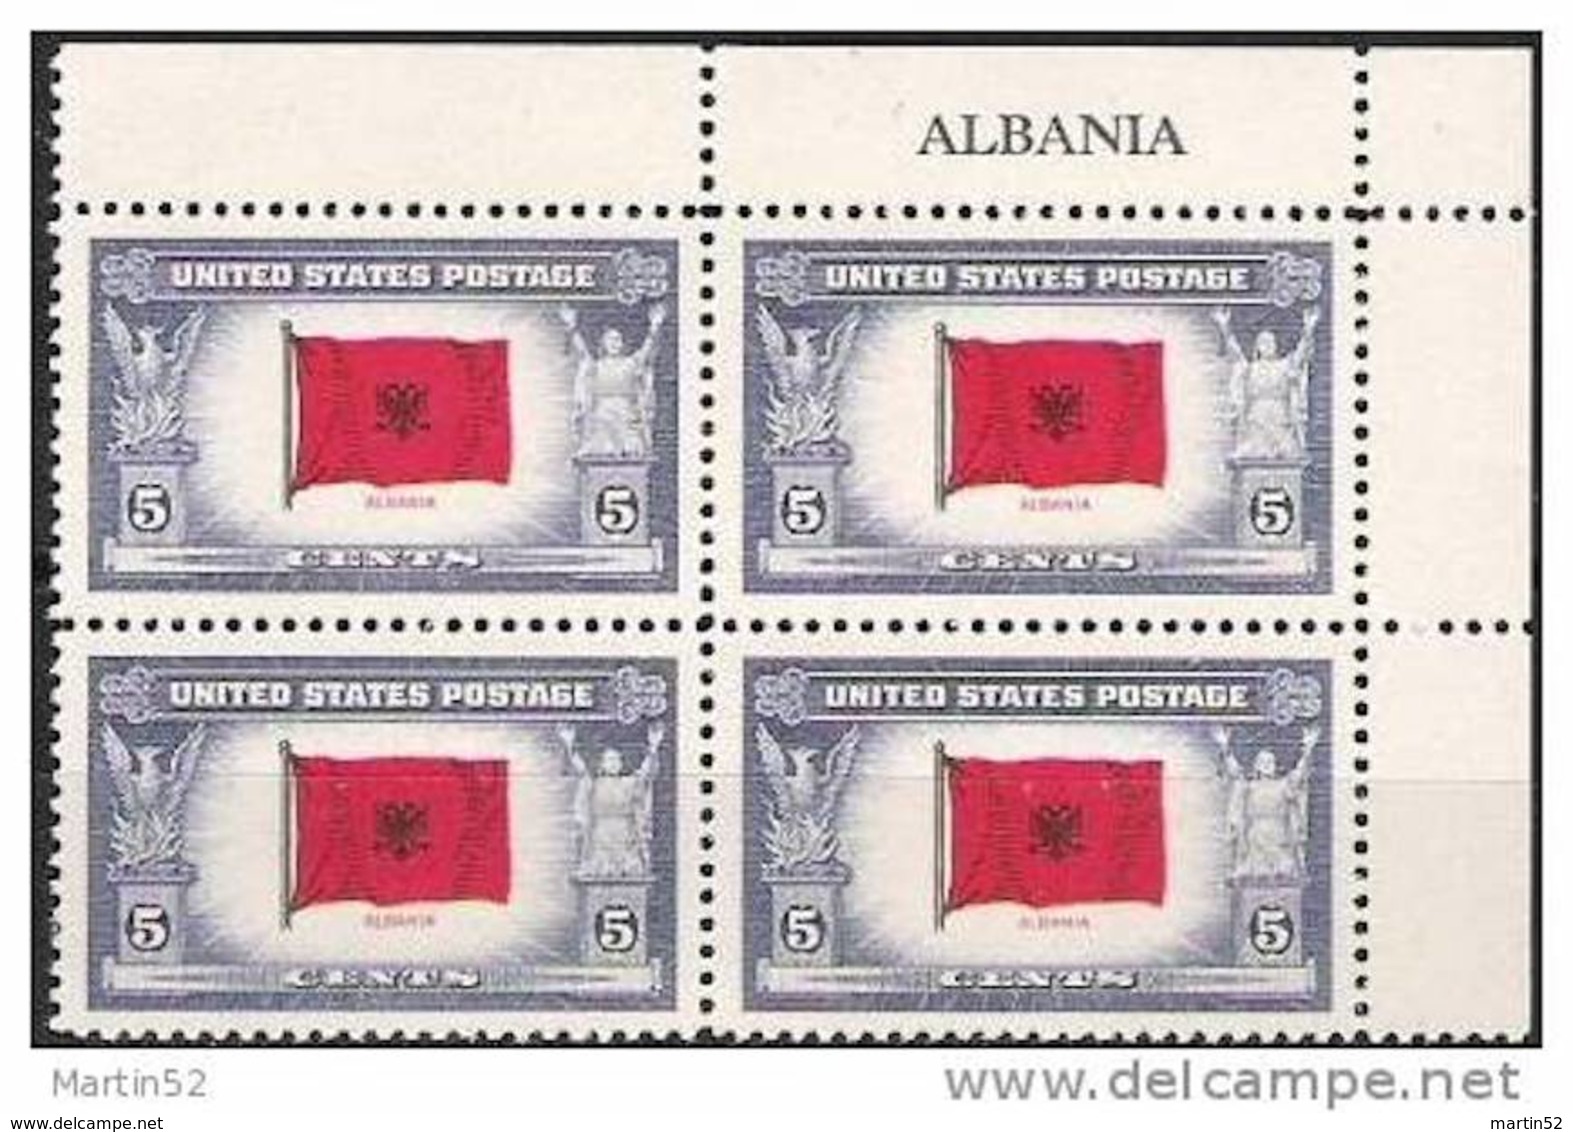 USA 1943: Flags Of Occupied Countries  "ALBANIA" Block Michel-No.512  ** MNH - Plaatnummers